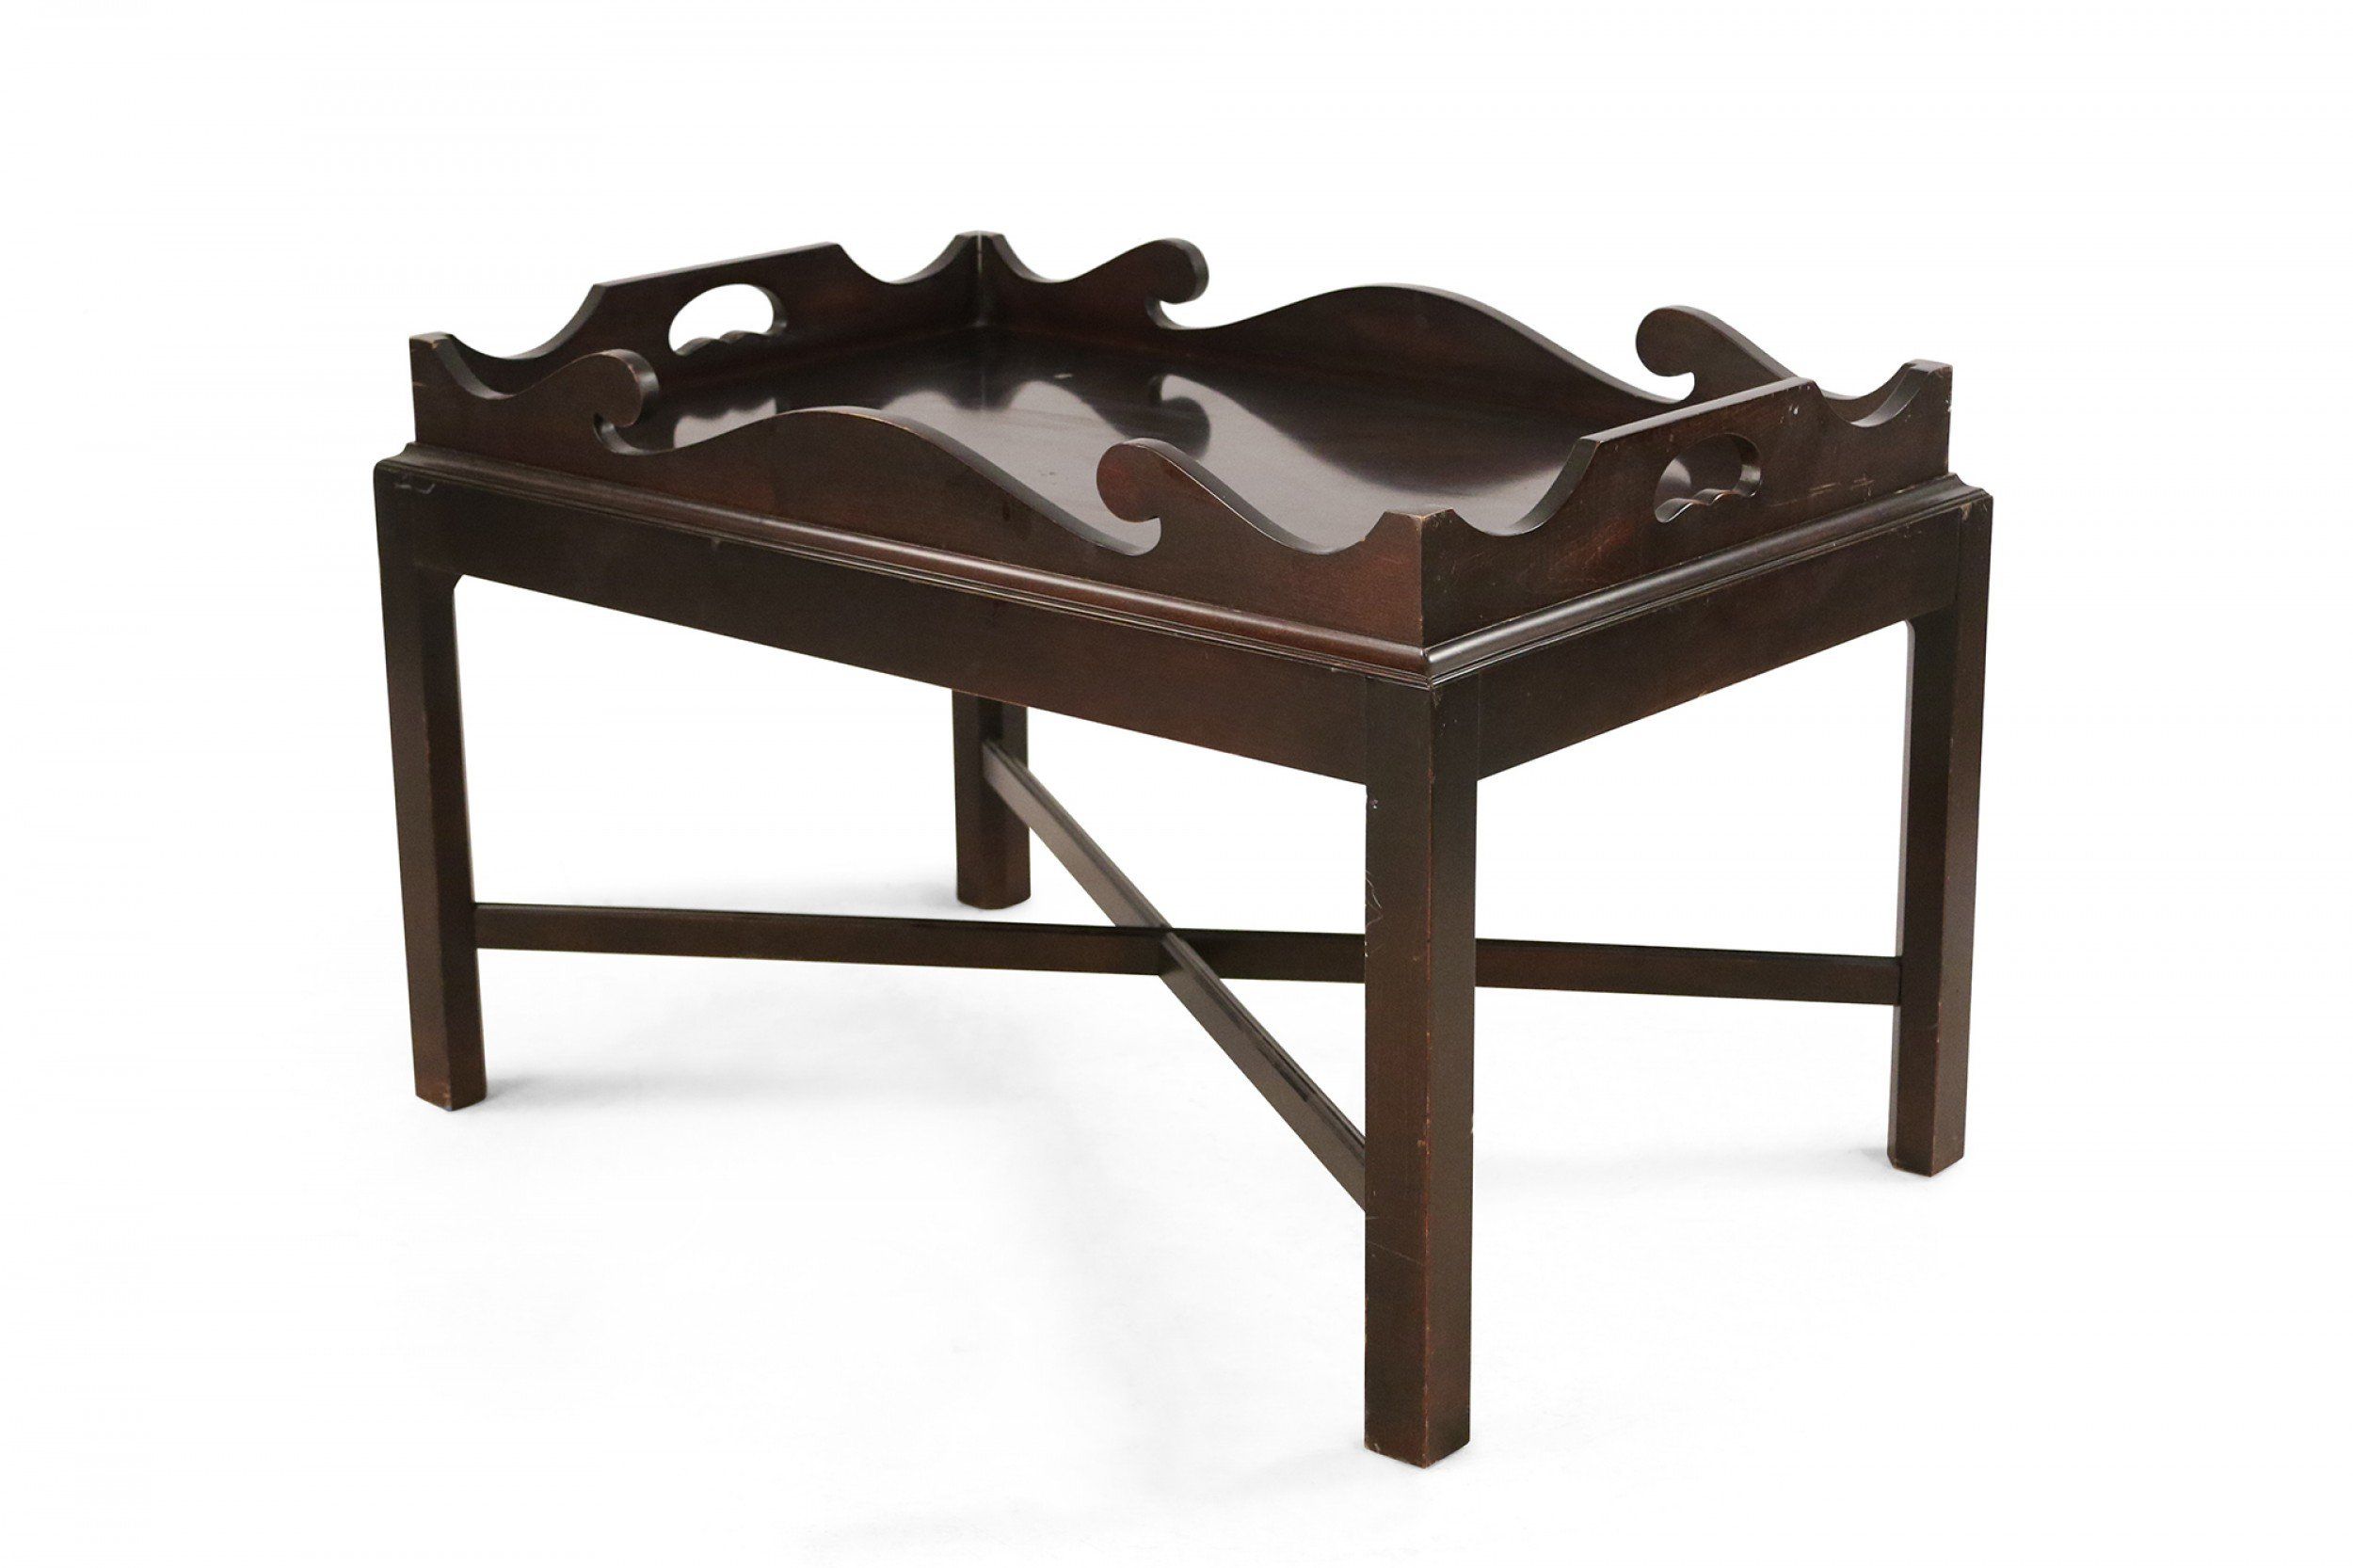 Contemporary Dark Wood Removable Tray Top Coffee Table Intended For Detachable Tray Coffee Tables (Gallery 8 of 20)